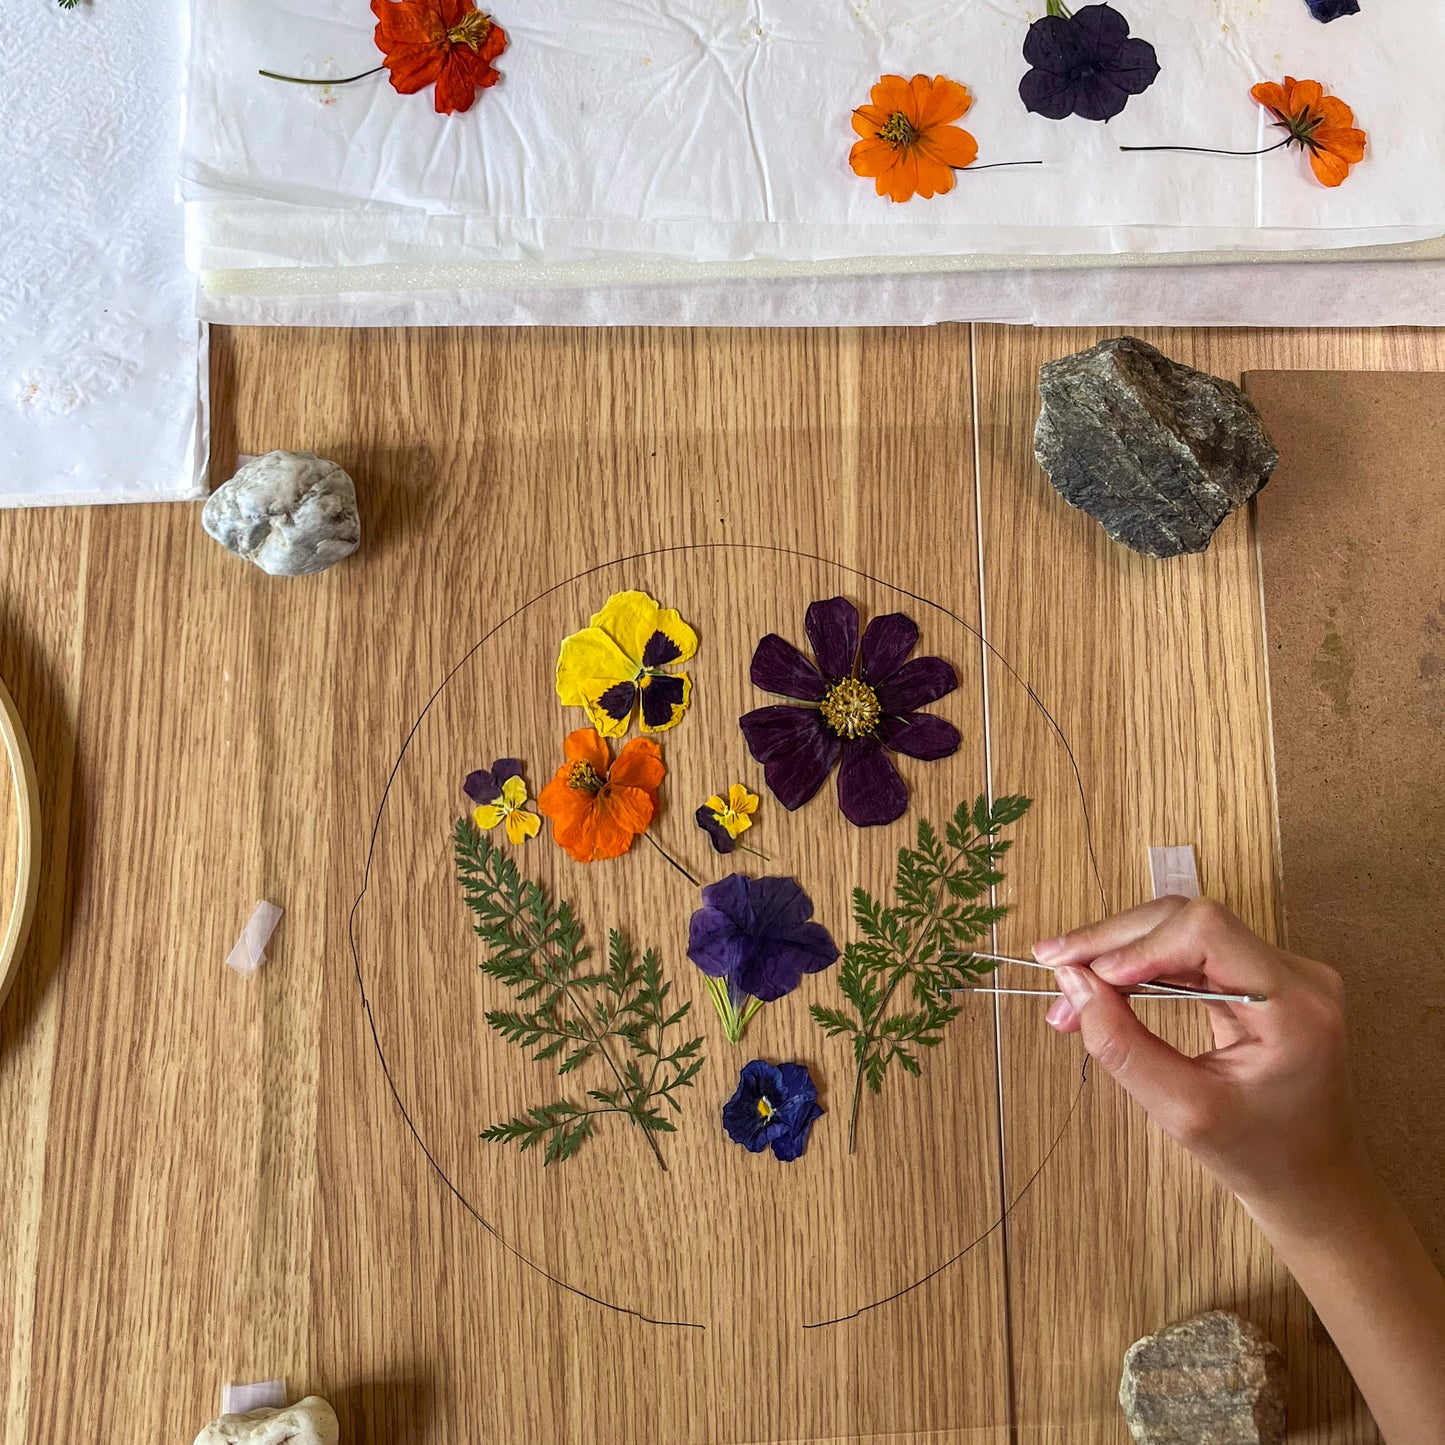 Kids Summer 3-Day Workshop | Natural Dyeing and Floral Printing | Age 8-14 | July 16th-18th | 9:30am - 12pm